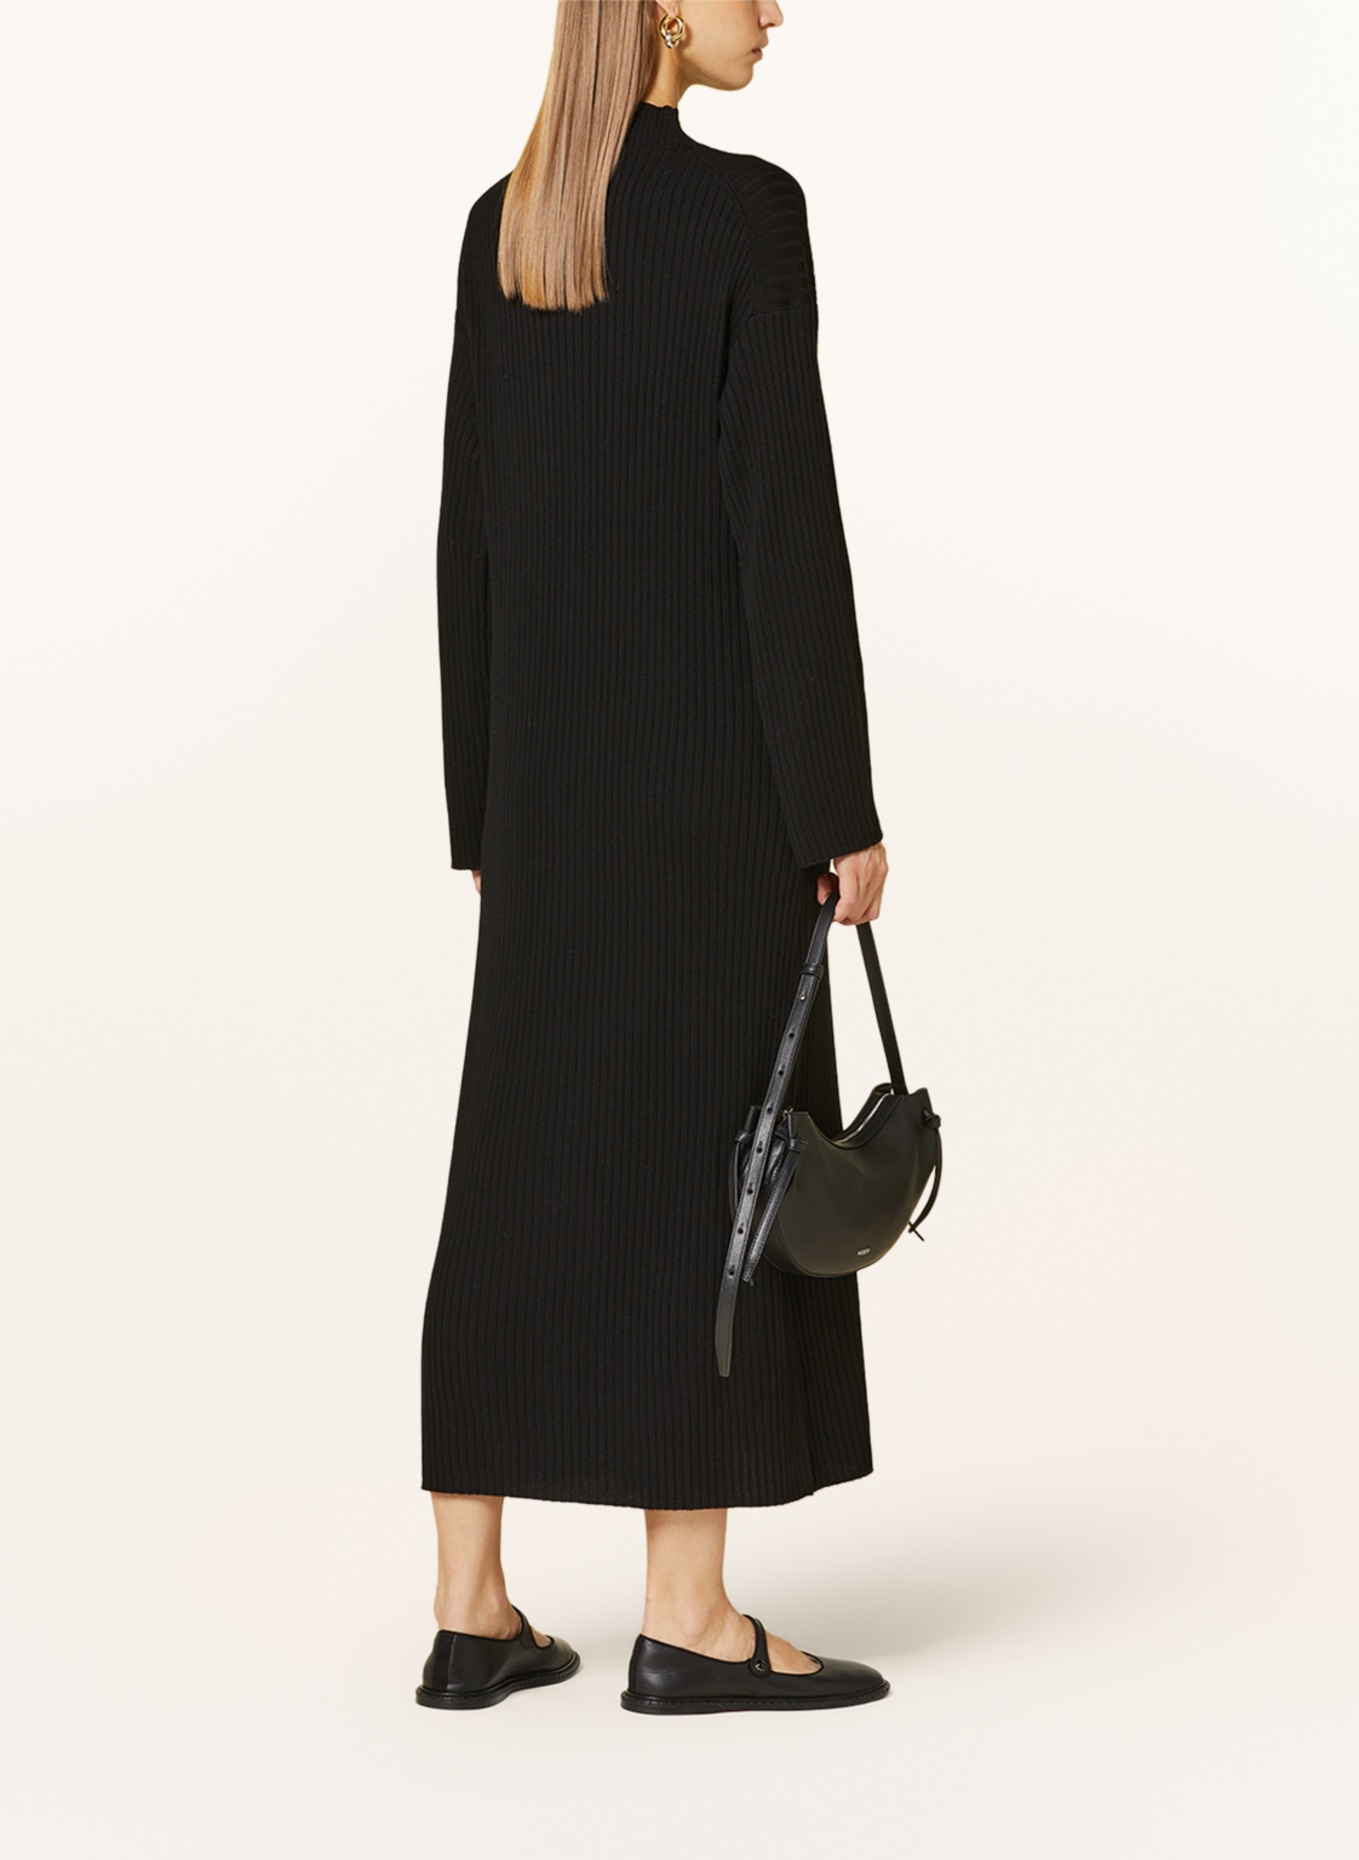 LOULOU STUDIO Knit dress ALTRA made of merino wool with cashmere, Color: BLACK (Image 3)